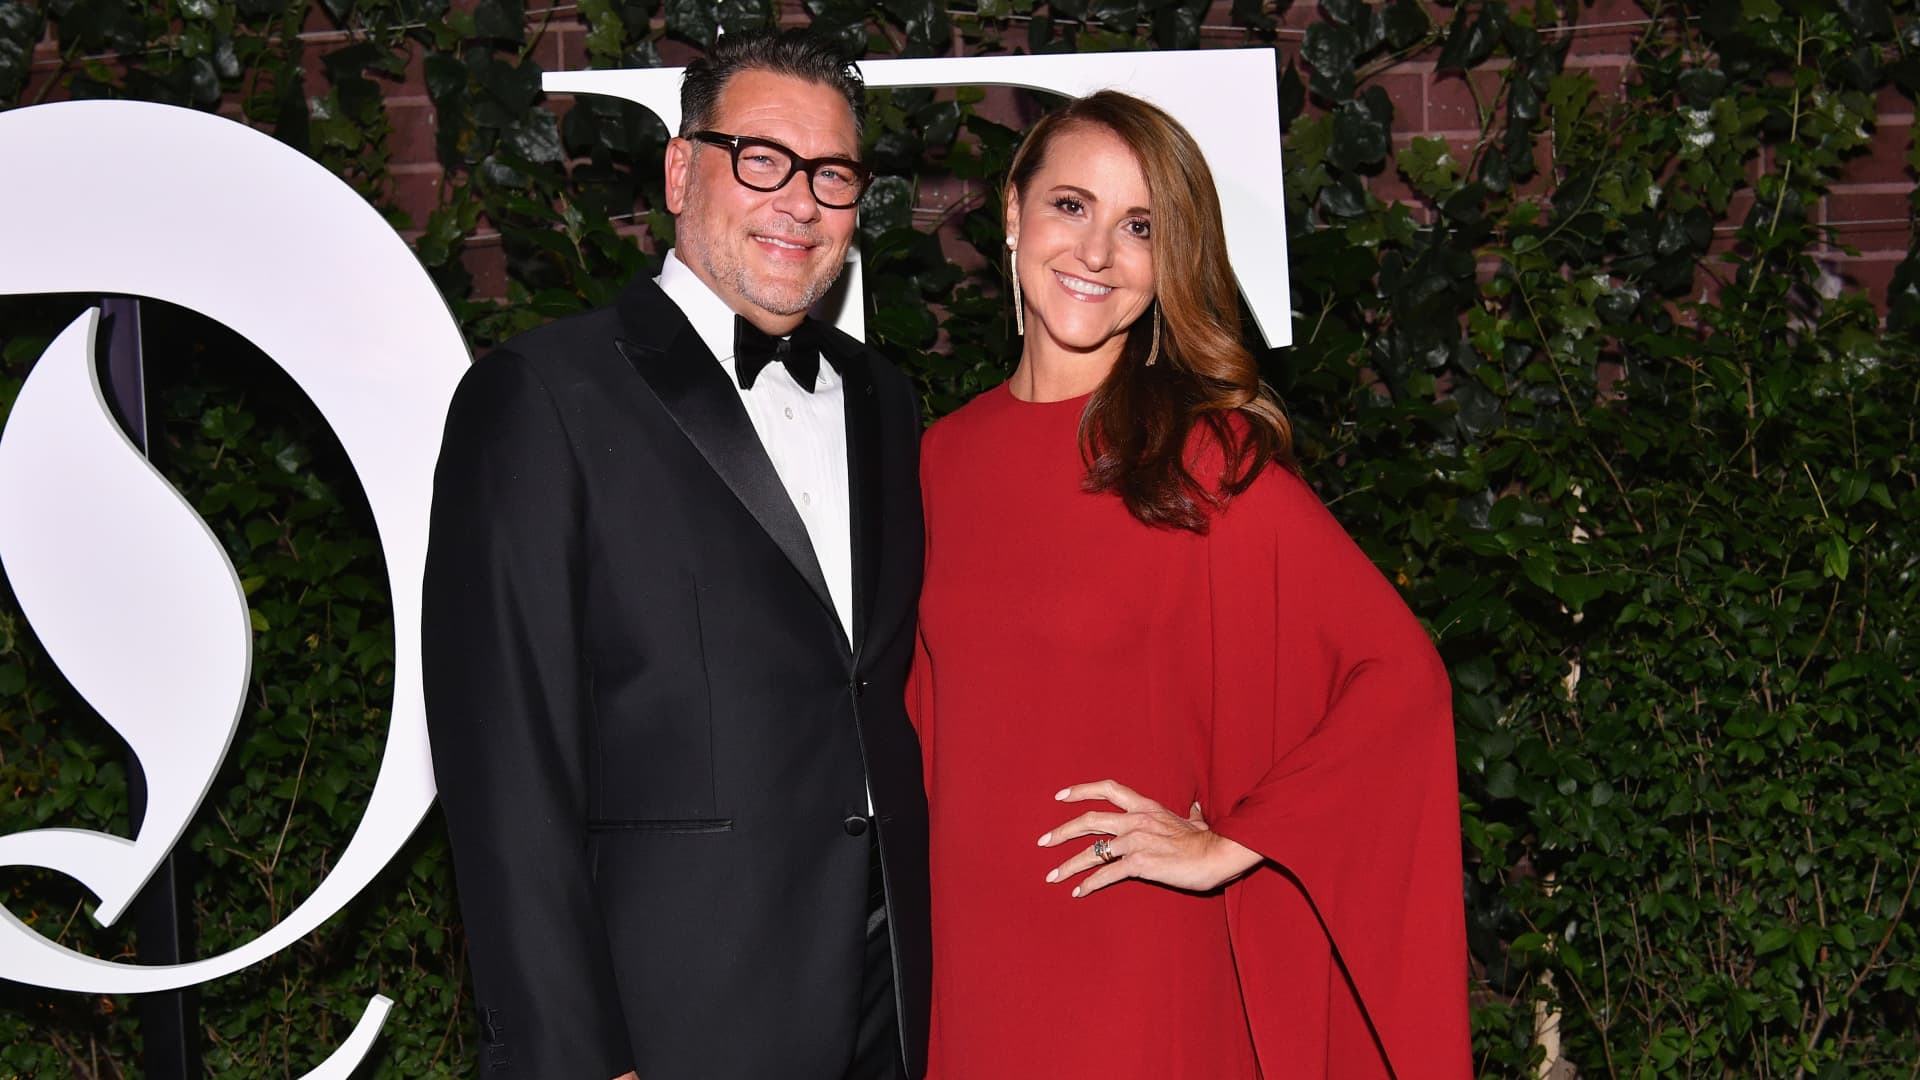 Mark and Bernadette Tritton in September 2017, at the #BoF500 gala dinner during New York Fashion Week.